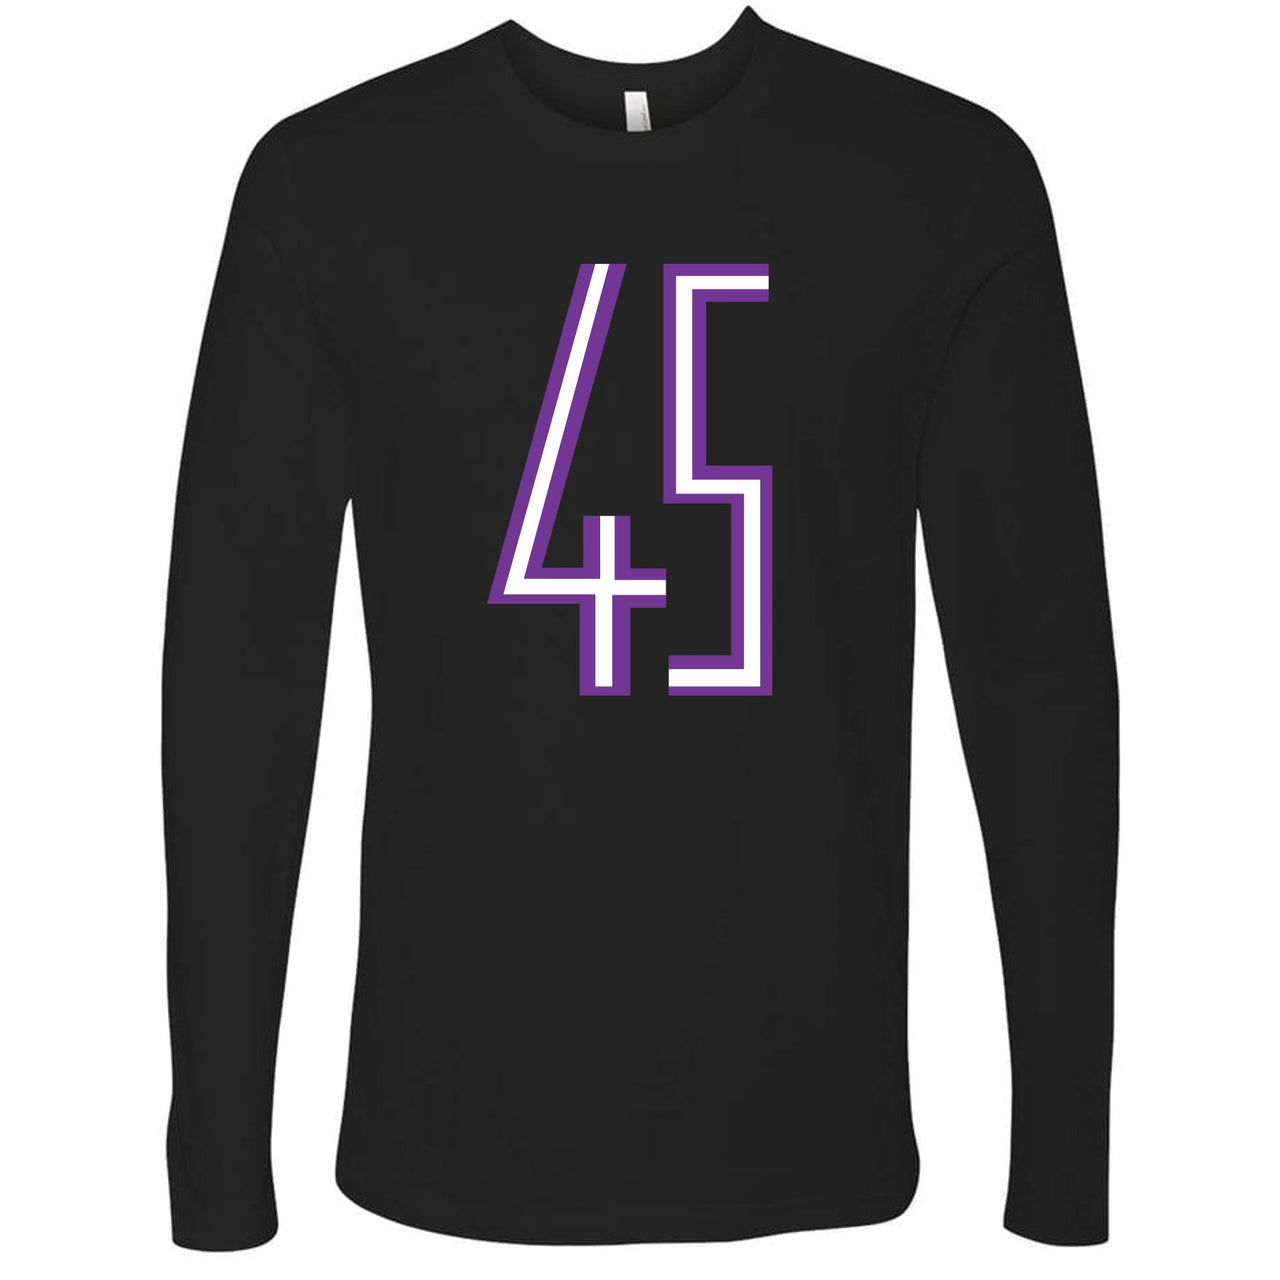 Printed on the front of the Jordan 11 Concord 45 sneaker matching longsleeve tee is the 45 logo in white and purple